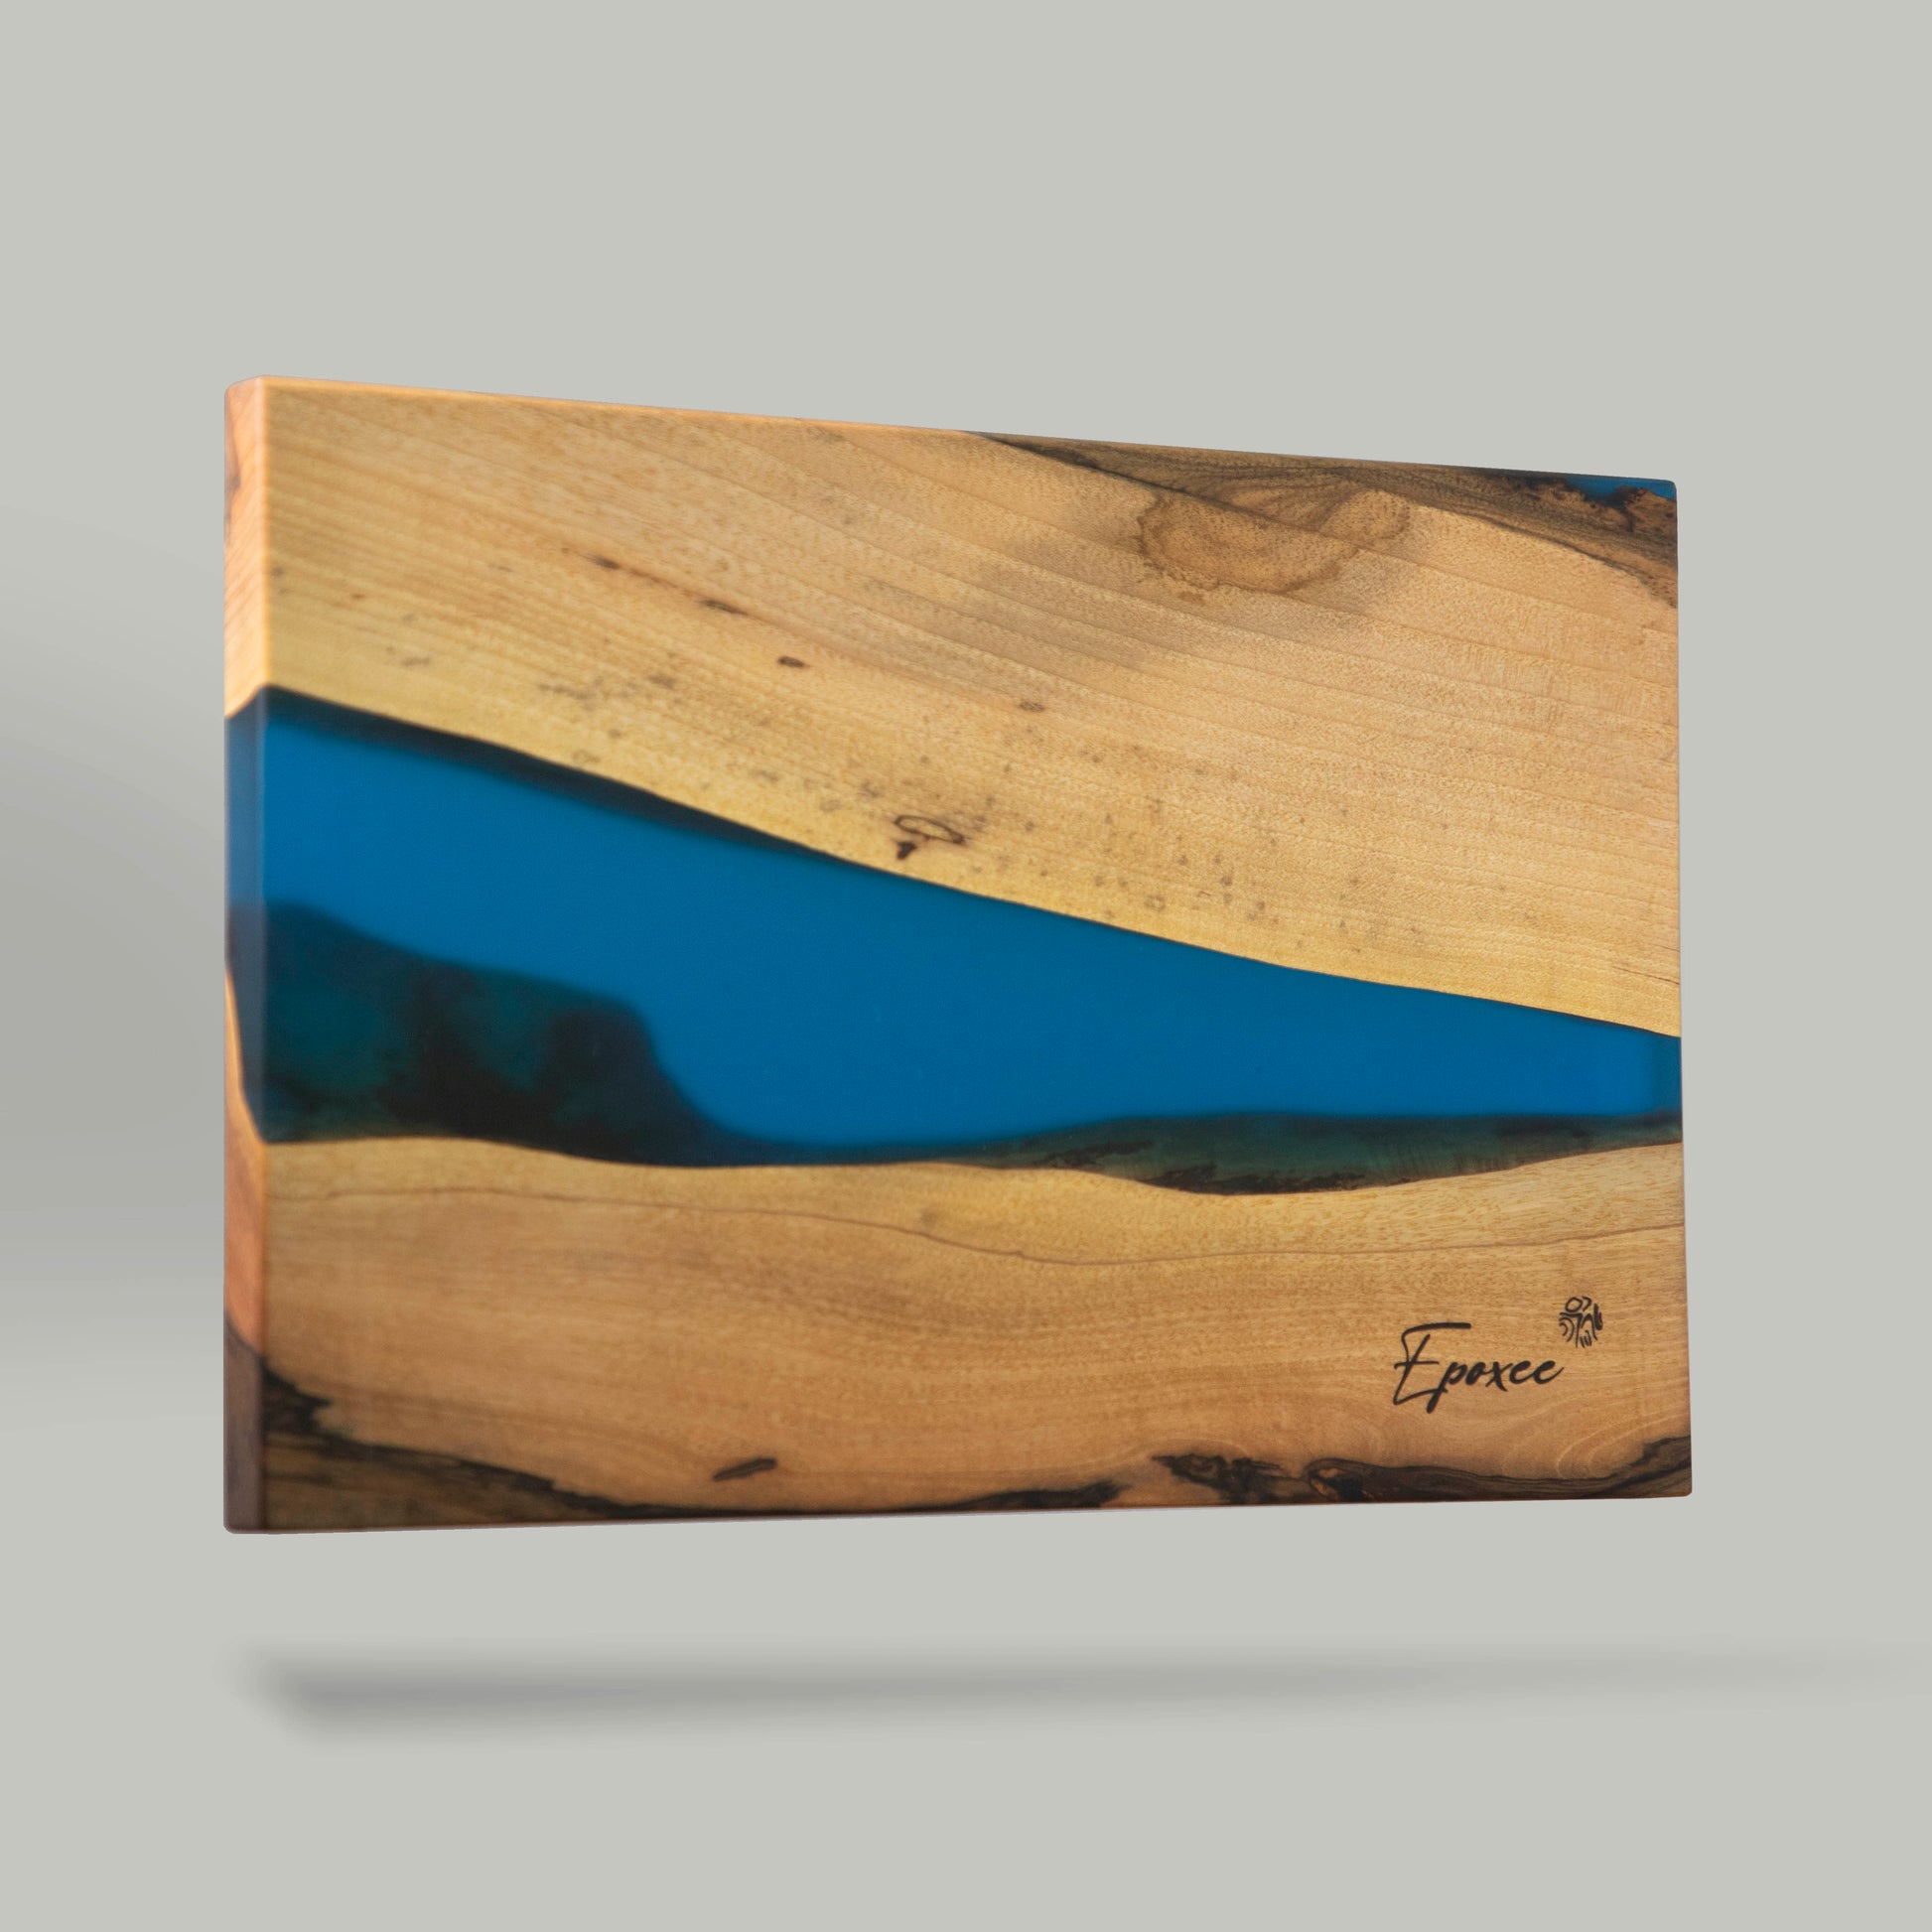 Serving board made from wood and epoxy resin in the color navy blue